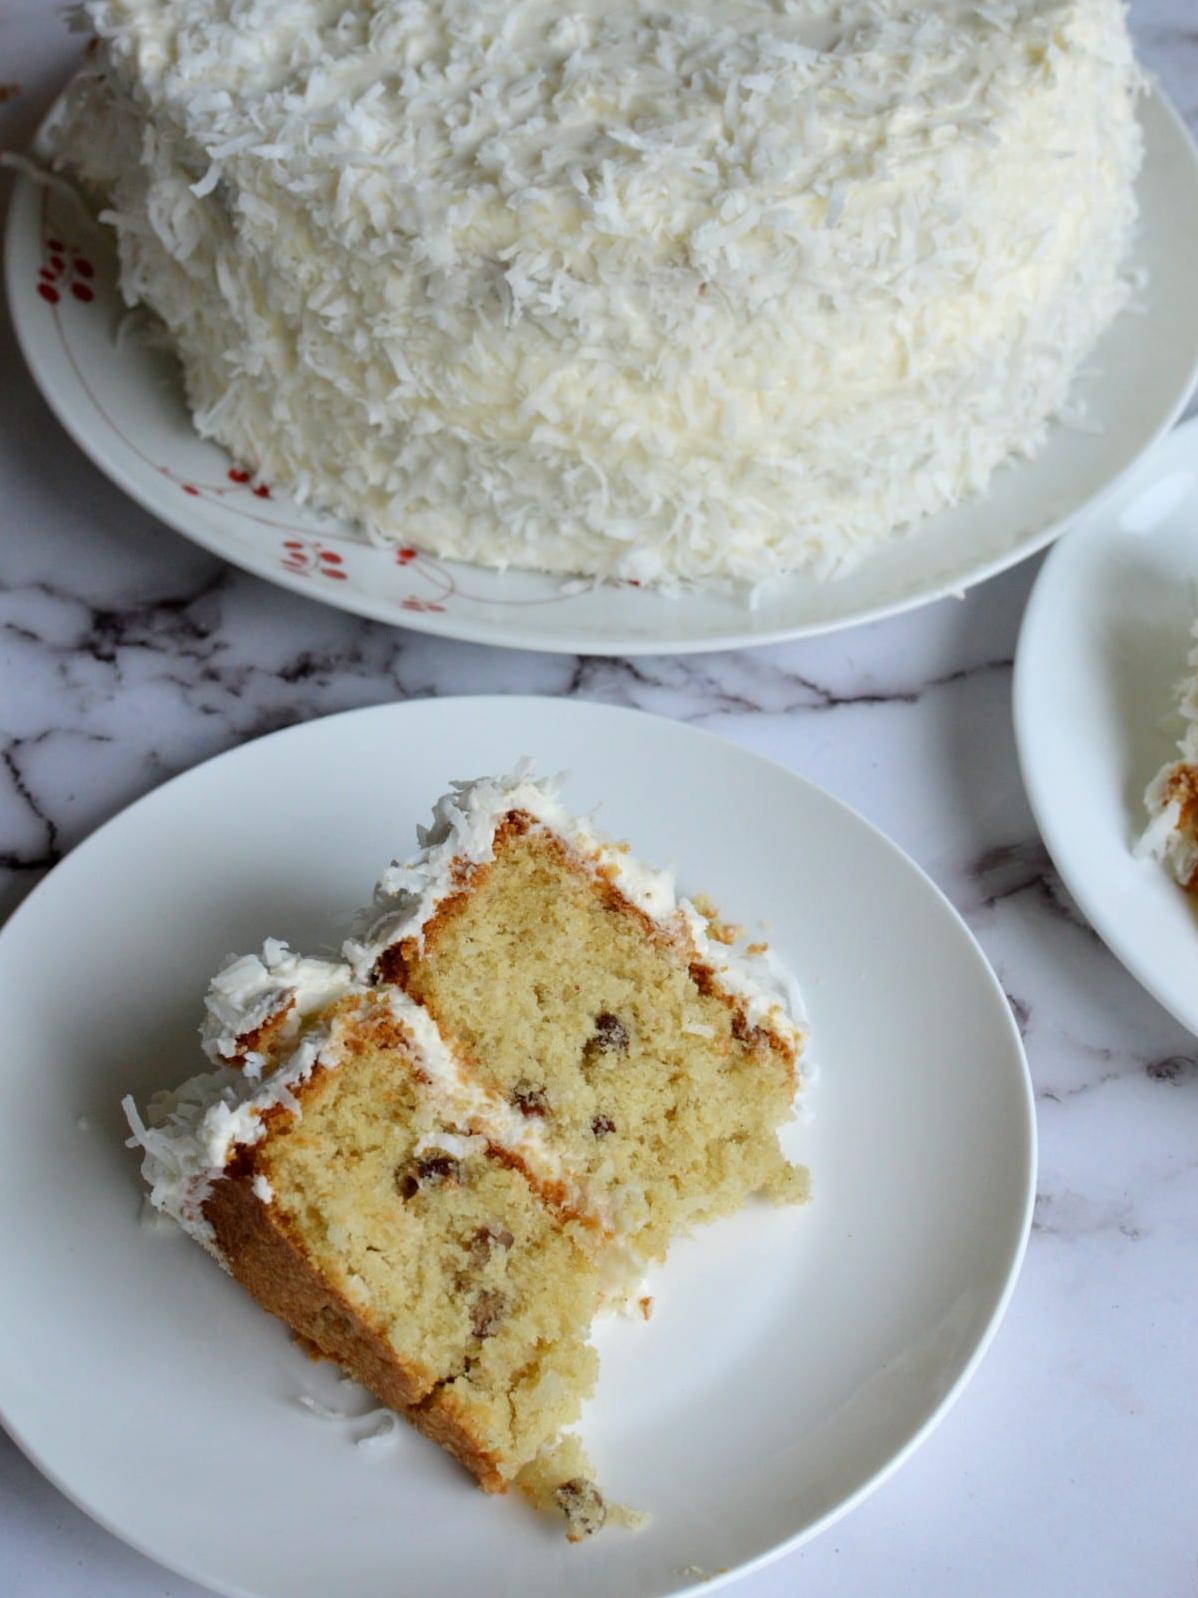  Uncle Ben's rice flour makes this cake light and airy